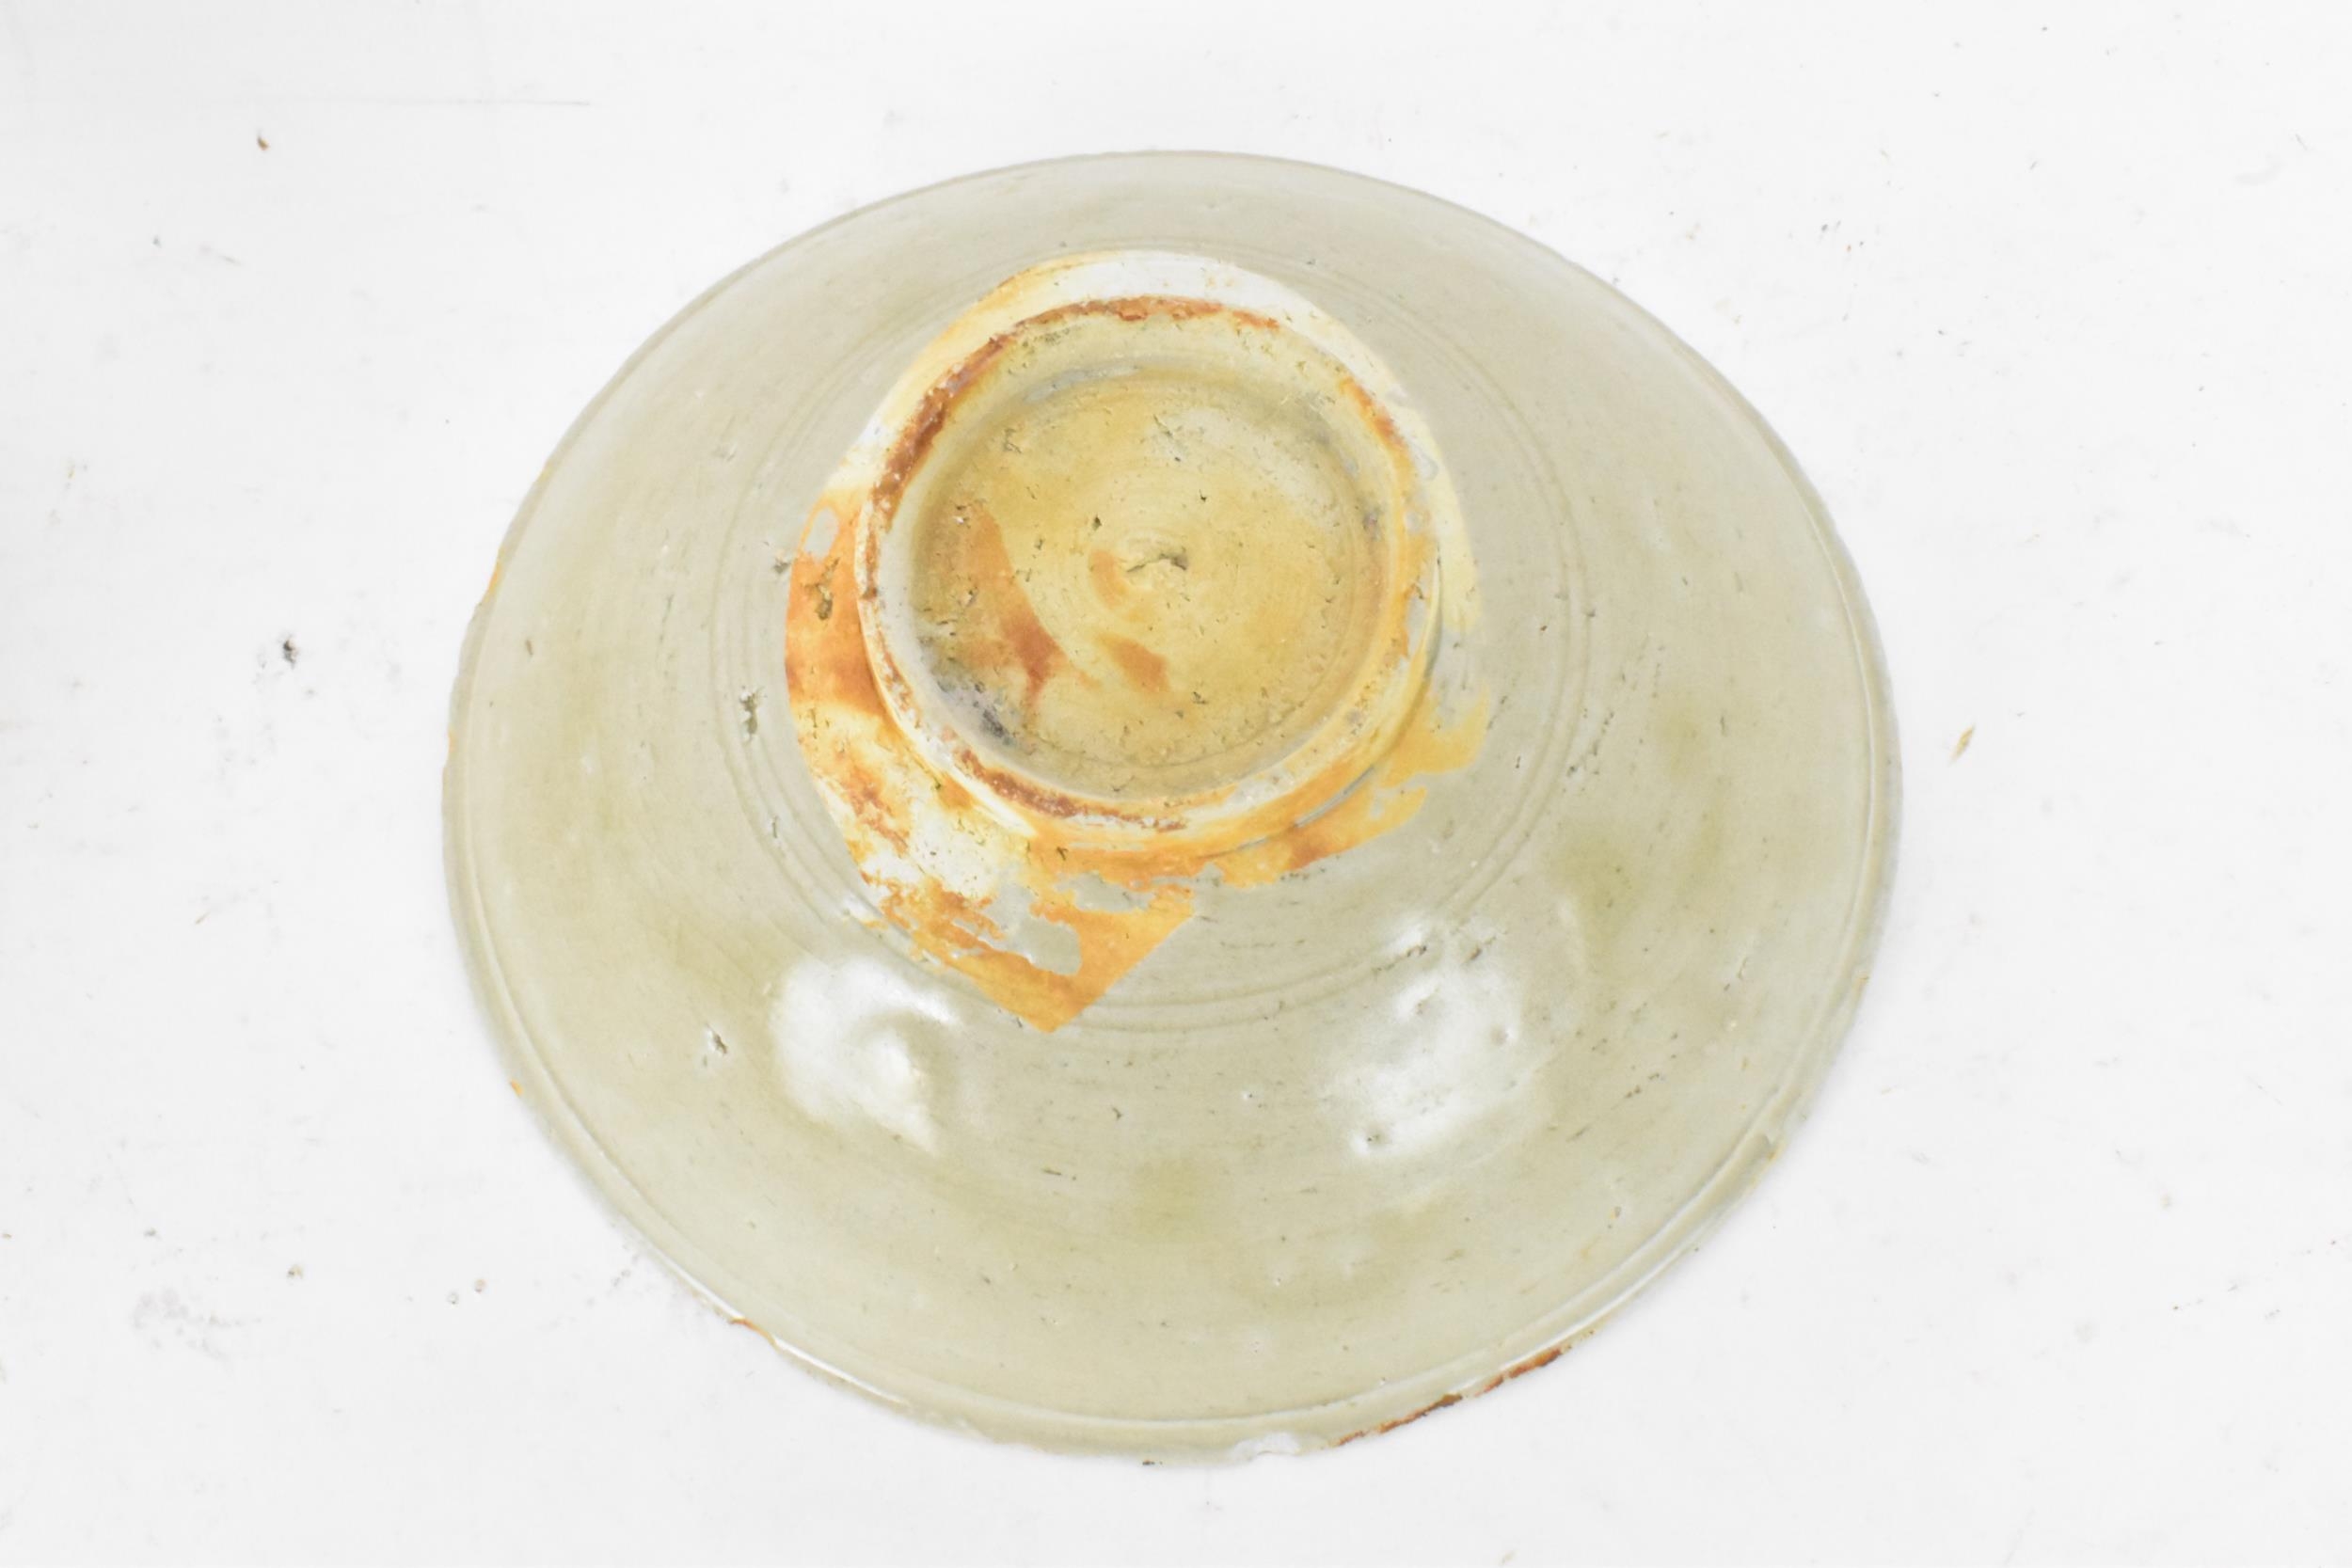 Two Chinese Song dynasty (960-1279) celadon glazed bowls, from a shipwreck in the South China - Image 3 of 5